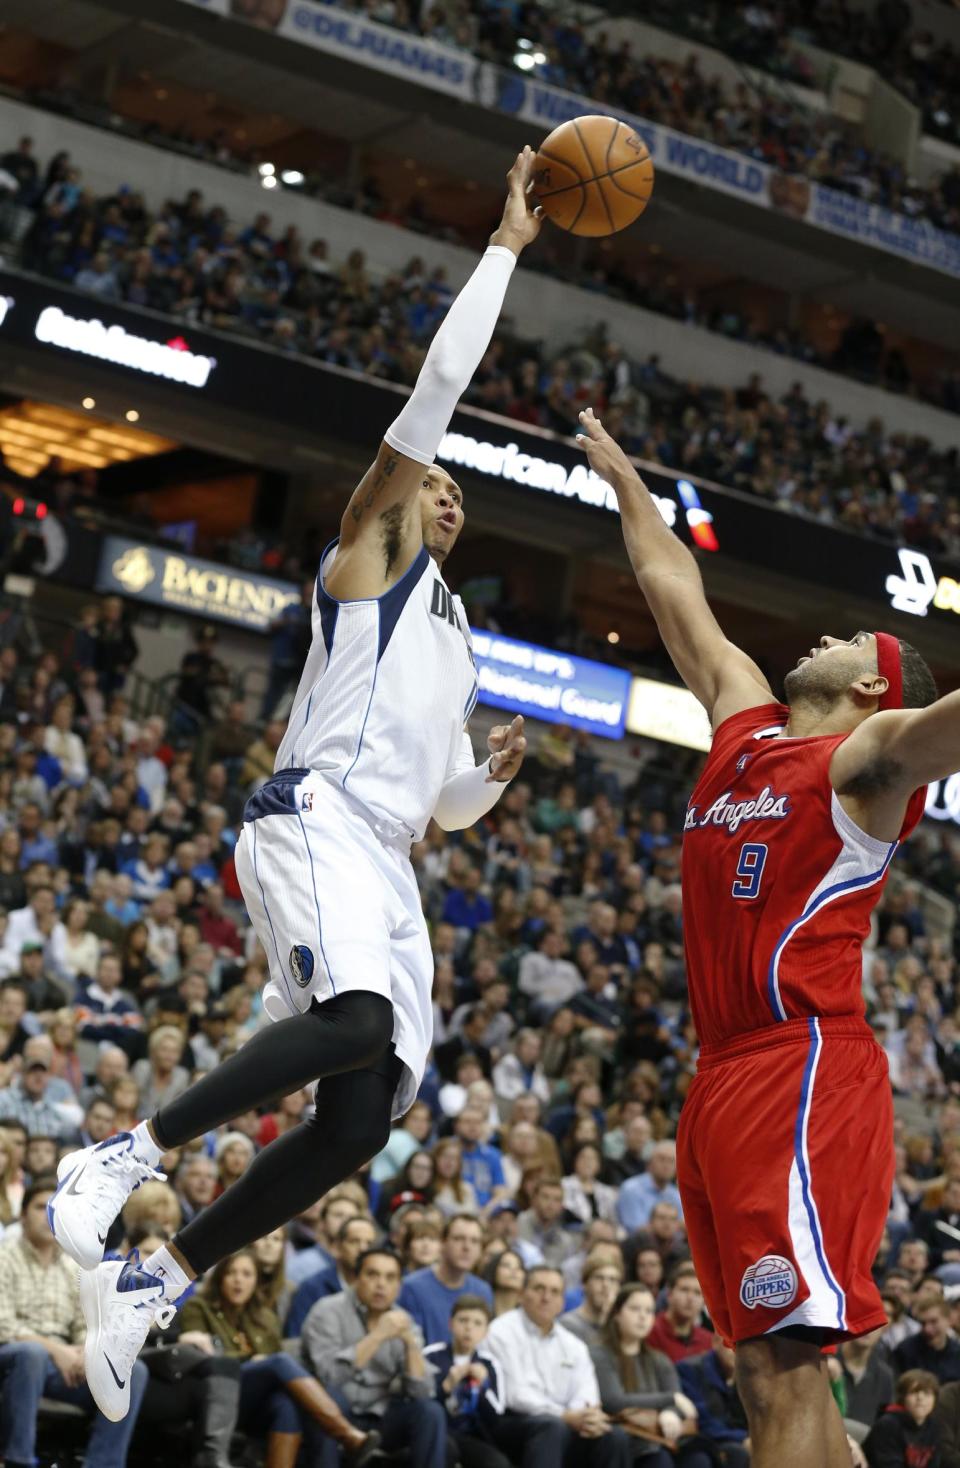 Dallas Mavericks forward Shawn Marion (0) take a shot over Los Angeles Clippers forward Jared Dudley (9) during the second half of an NBA basketball game Friday, Jan. 3, 2014, in Dallas. The Clippers won 119-112. (AP Photo/Sharon Ellman)